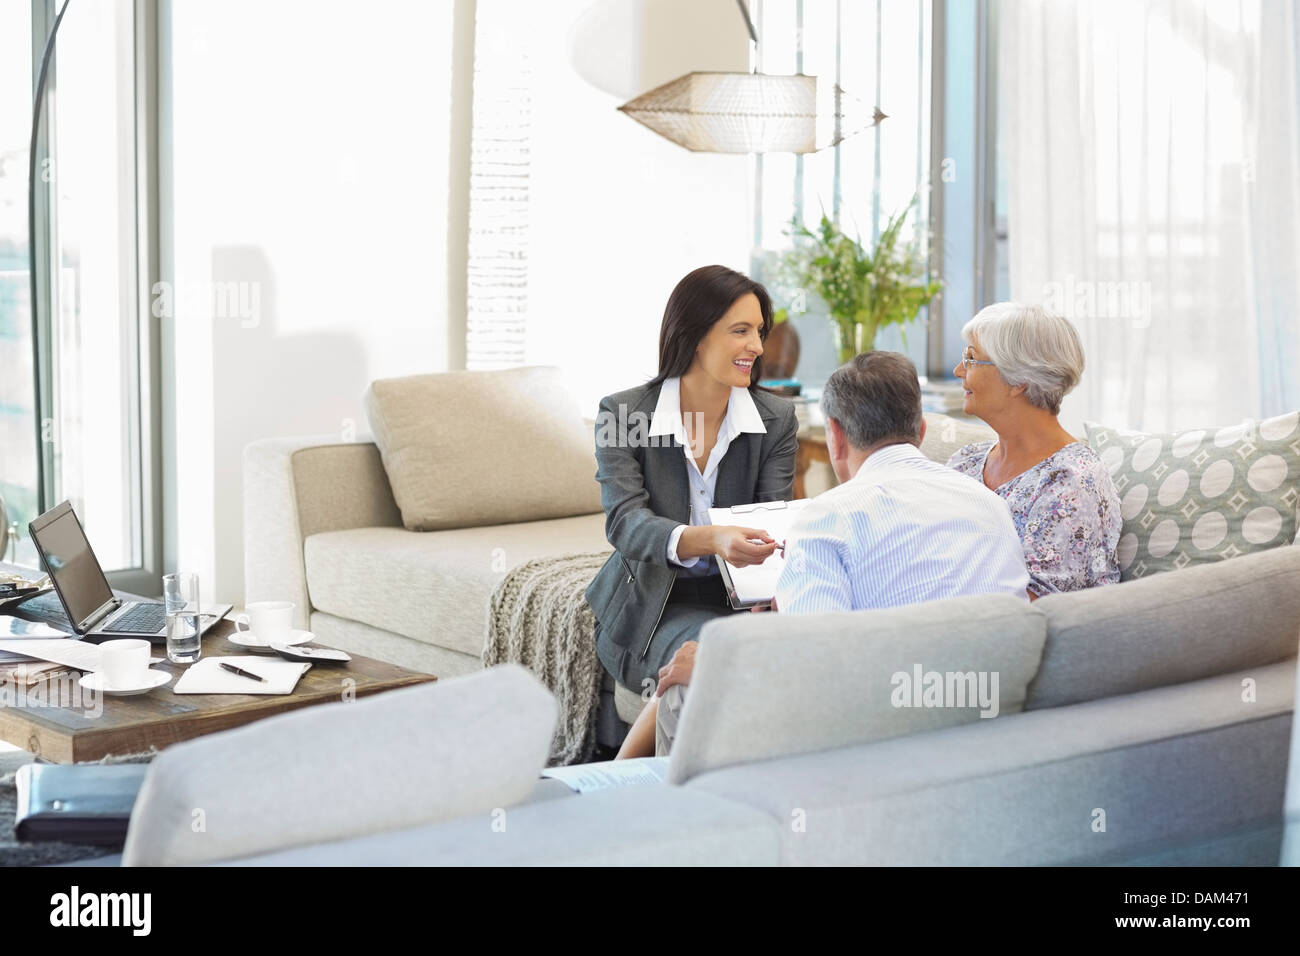 Financial Advisor talking to couple on sofa Banque D'Images